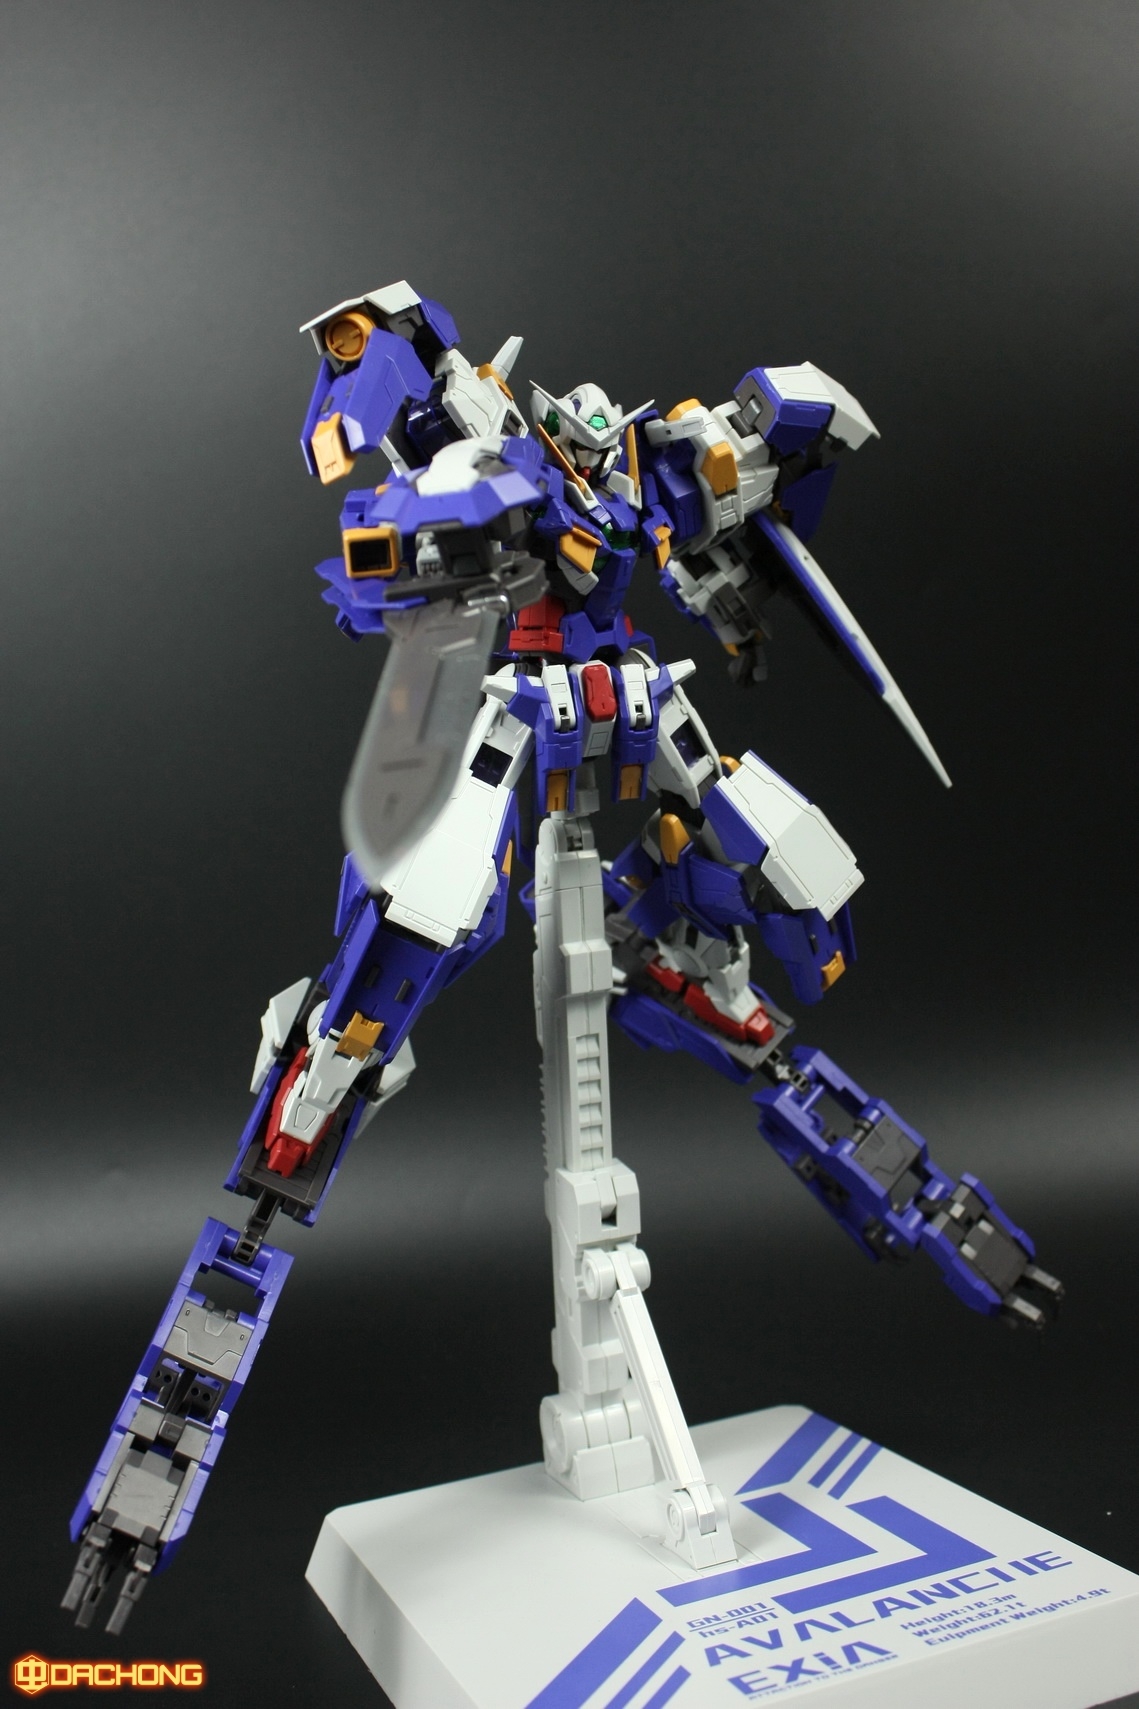 S254_MG_exia_HS_review_inask_094.jpg